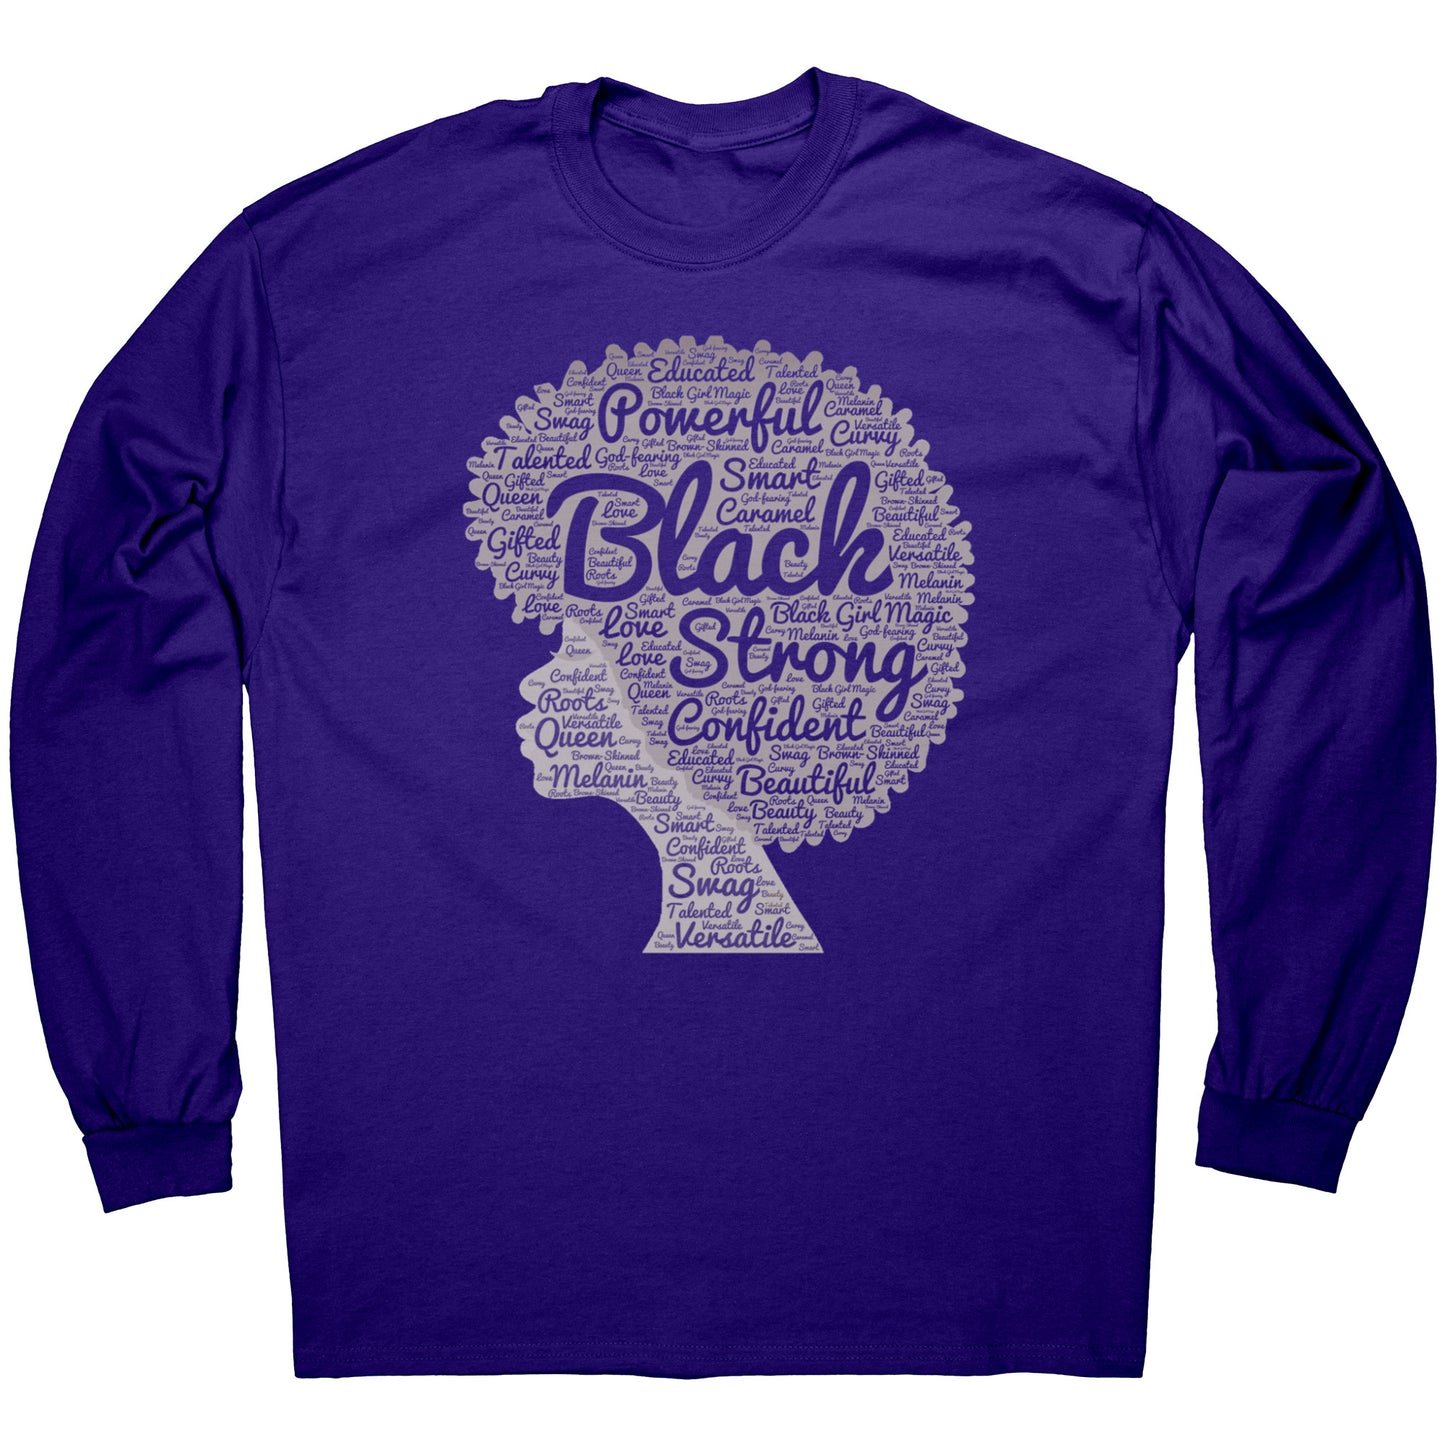 Black and Strong Long Sleeve T-Shirt